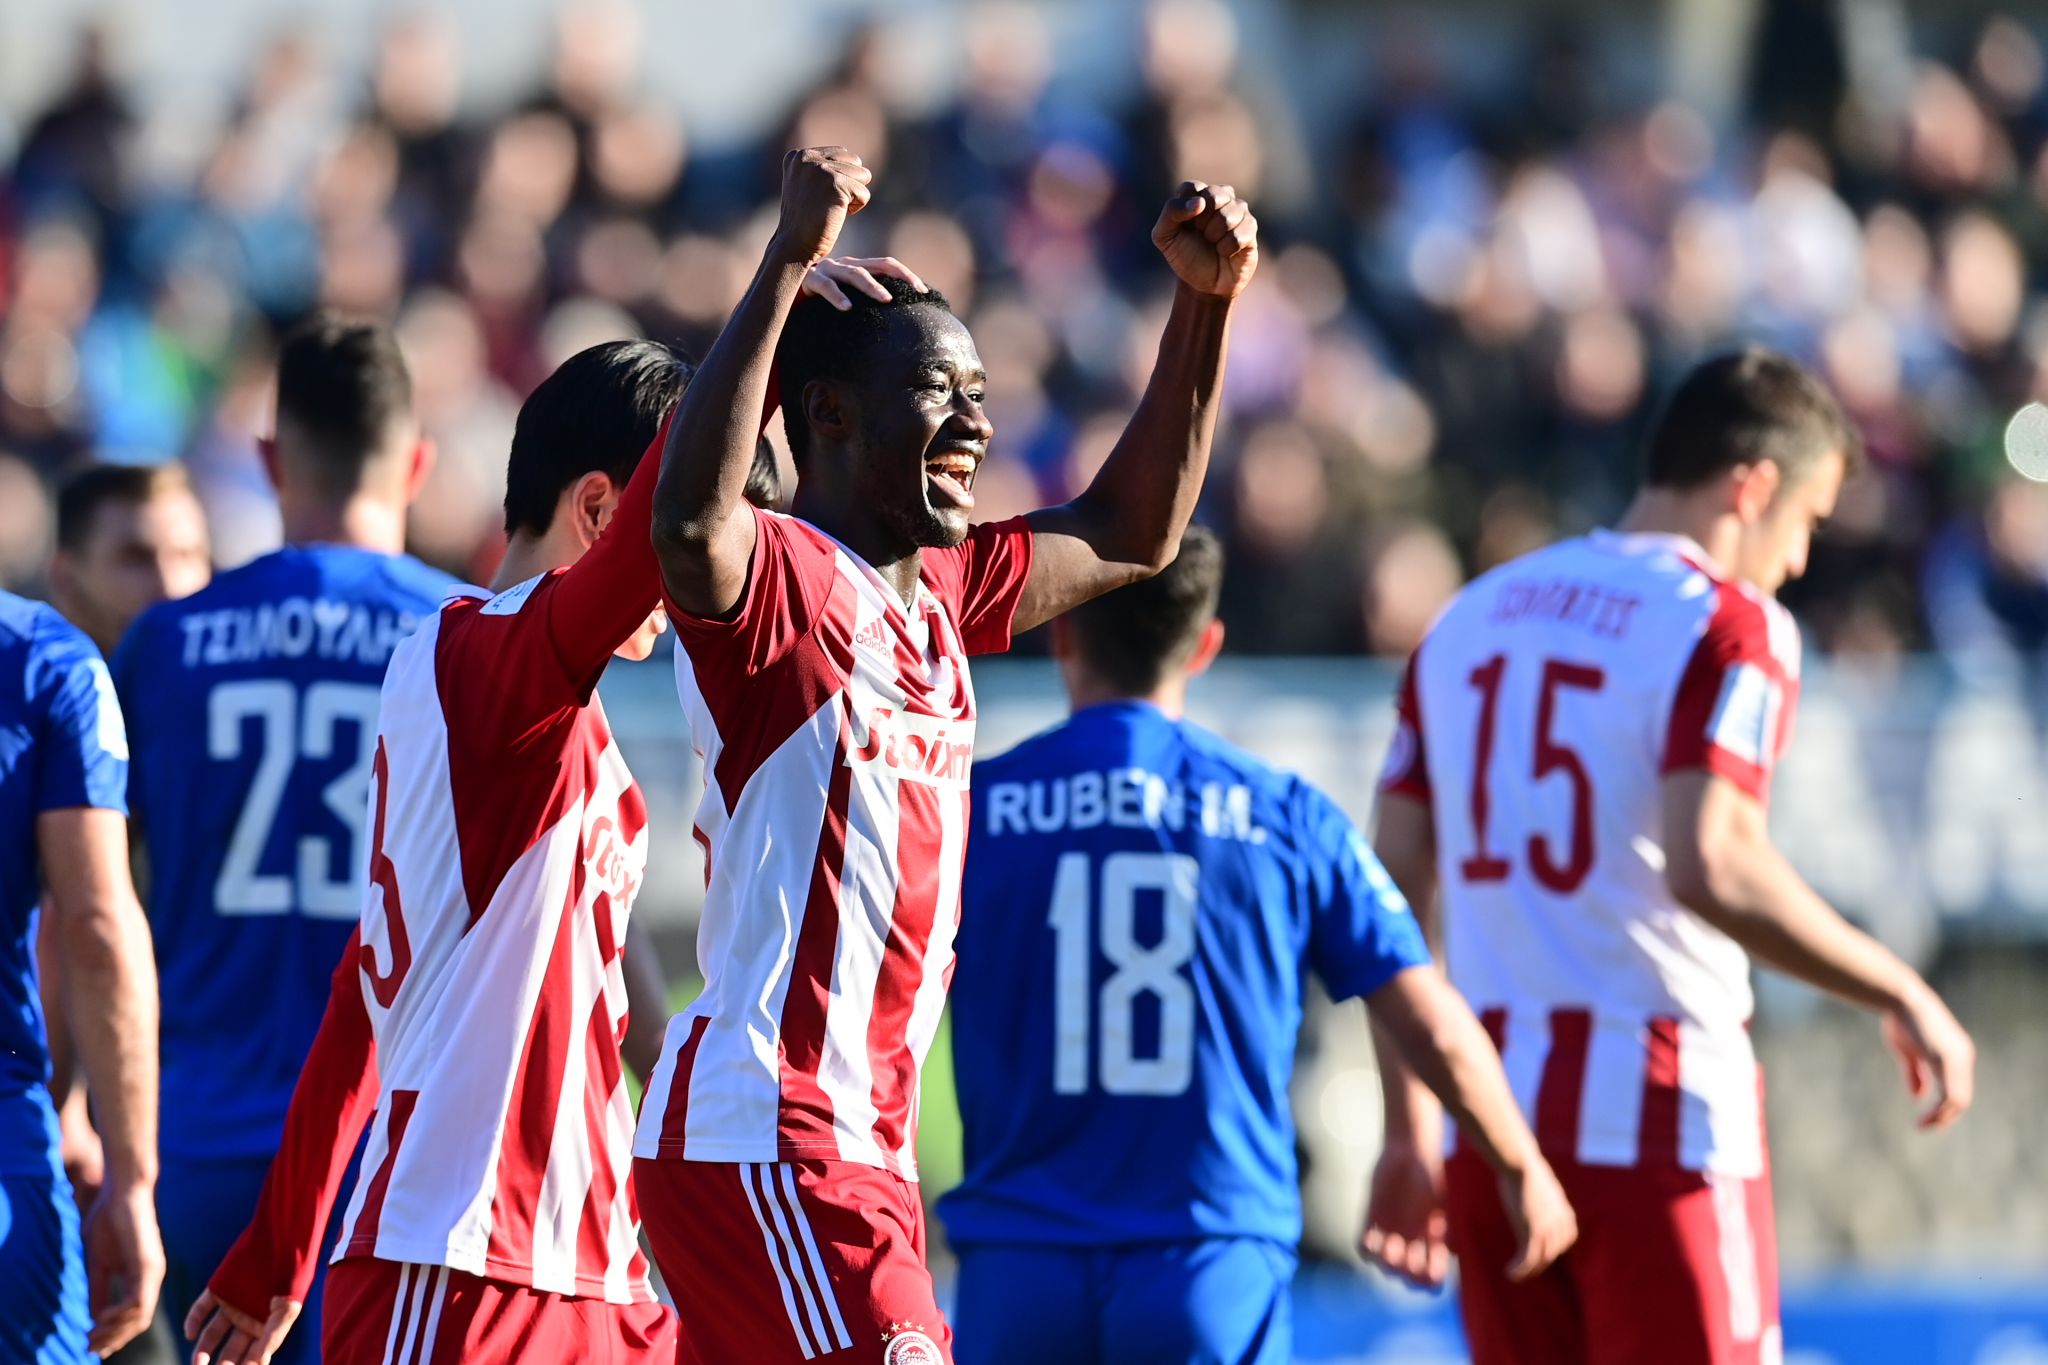 Olympiacos performed better and won an easy victory